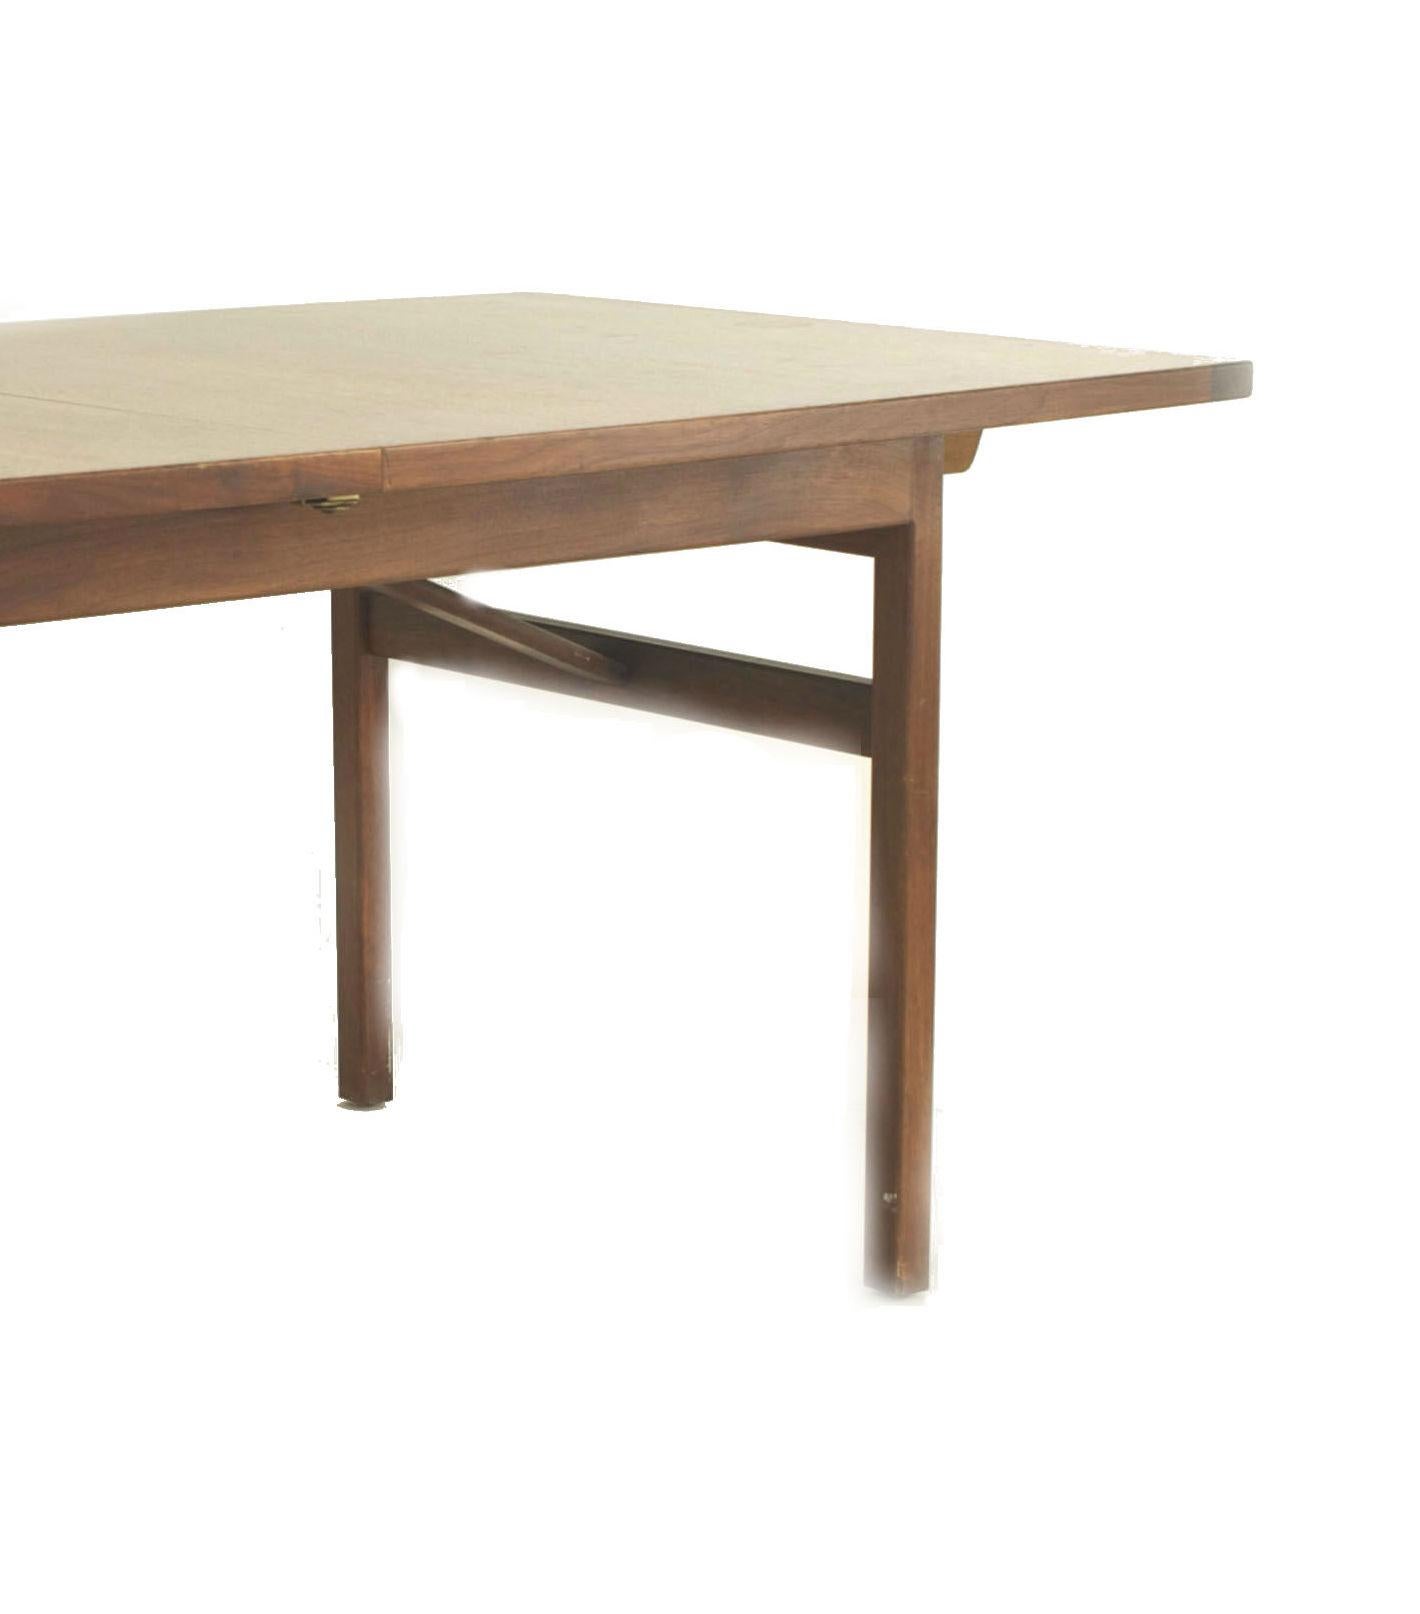 Danish Post-War Design teak dining table with a bowed design top and resting on square legs connected by a stretcher on either side. (label: JENS RISOM)
